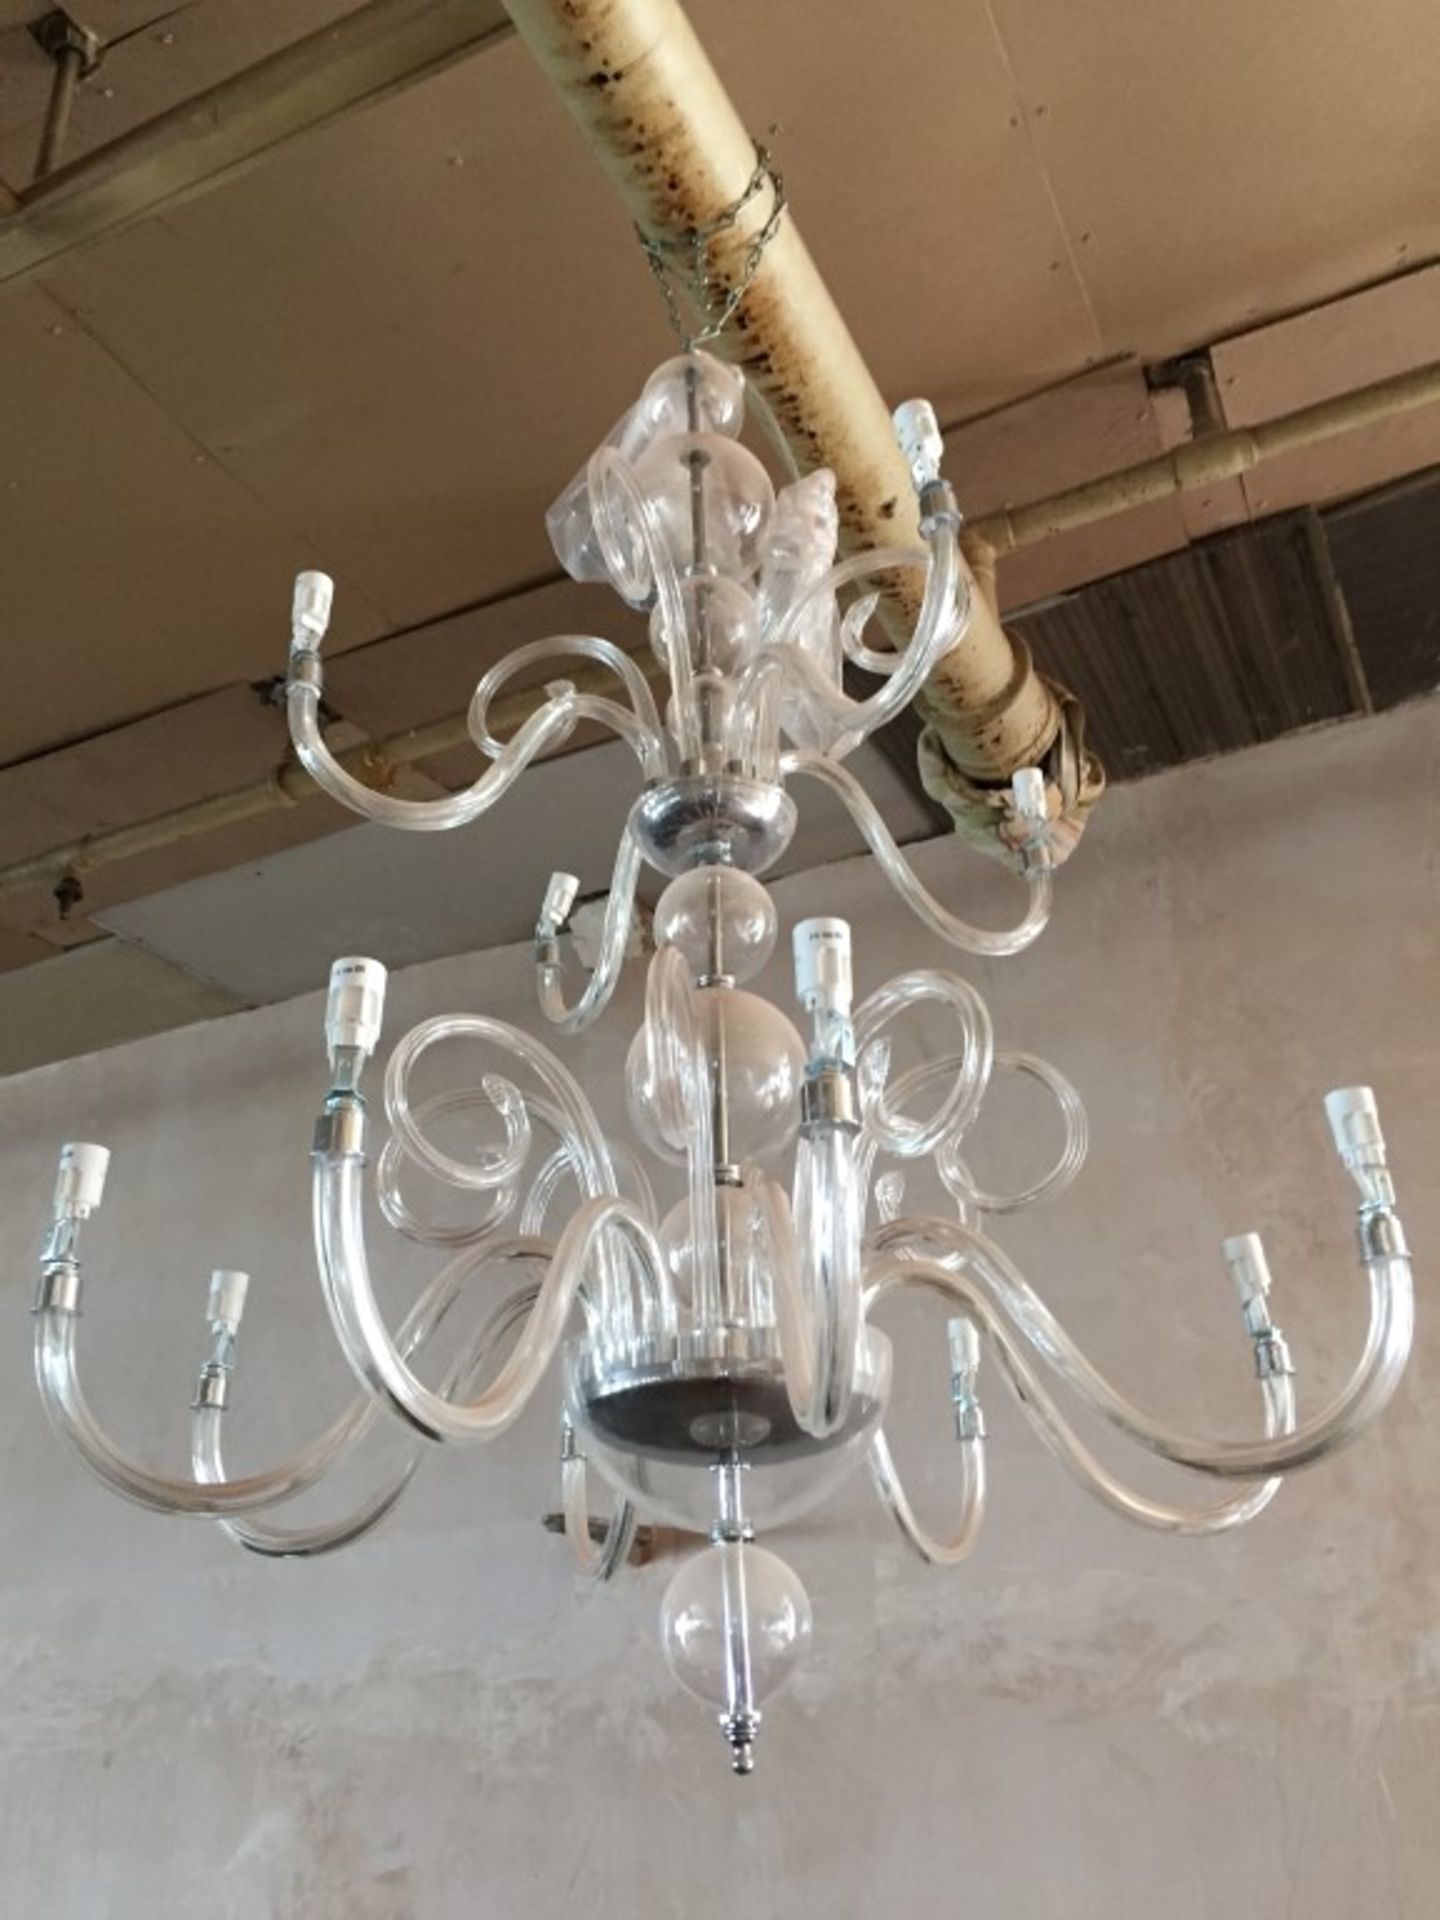 1 x Large, Ornate Chandelier-style Light Fitting - Dimensions To Follow - Ref: NDE084 - CL122 -